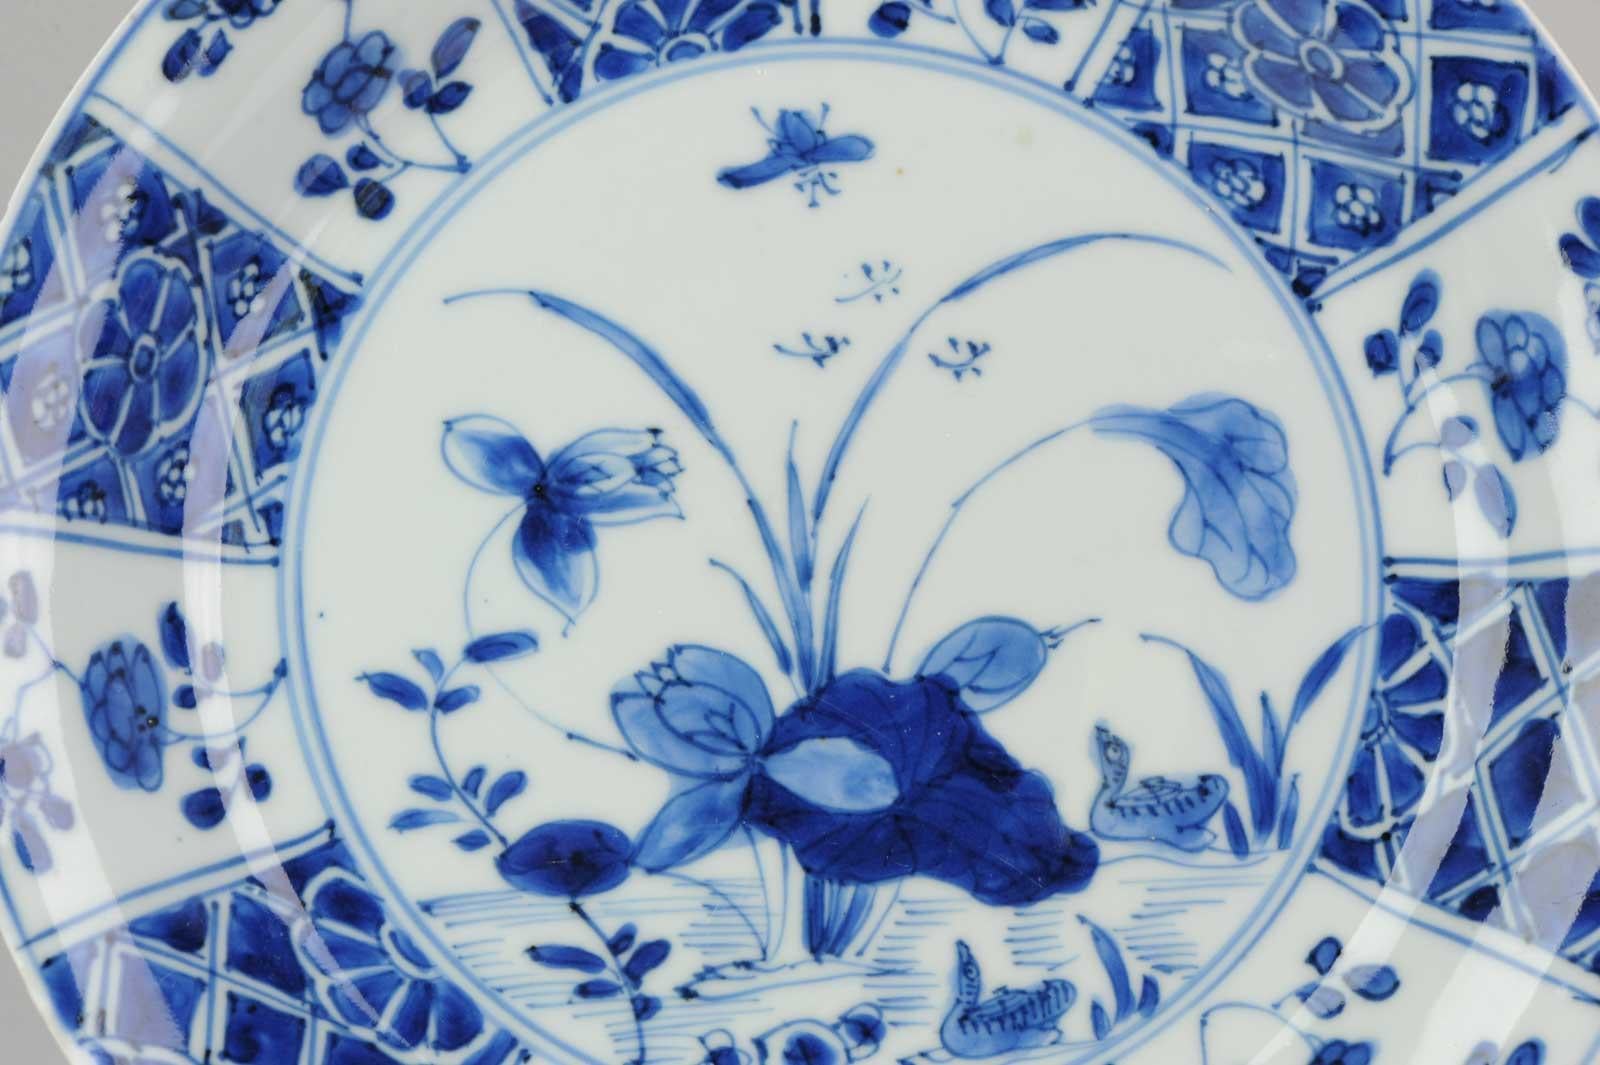 Dish on foot ring with a flat, underglaze blue. With lovely scene of ducks in a water scene. Marked at base. Lotus flowers.

This unusual dish is an interesting piece.

Condition: some chips or frits and 1 hairline. Size: 213 x 26mm

 

